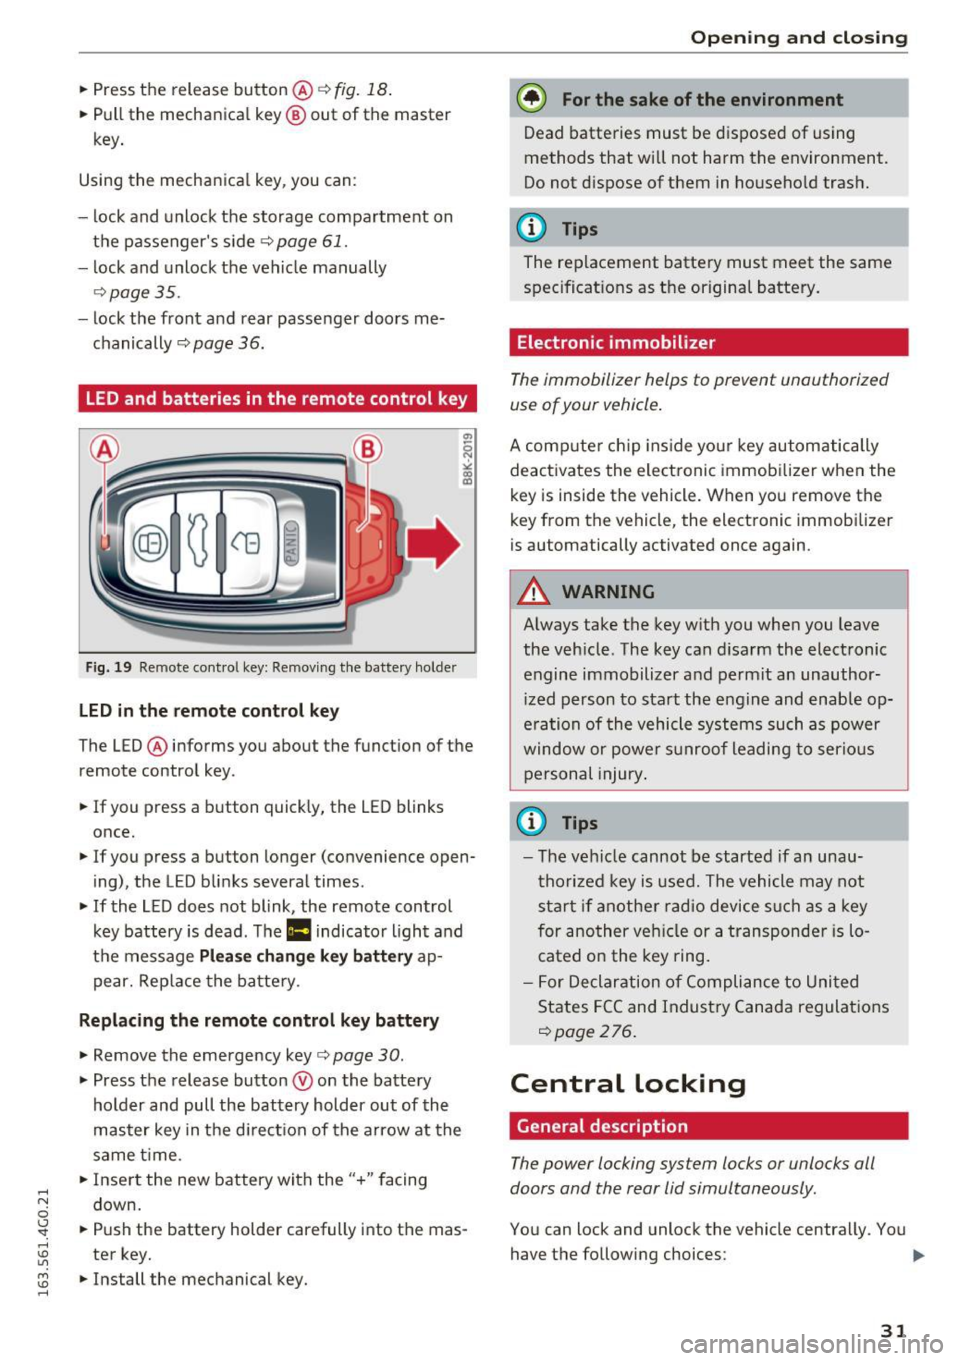 AUDI A6 2016 Owners Guide .... N 
0 CJ <I: .... I.Cl U"I 
M I.Cl ...... 
.. Press  the  release button@ c::> fig.  18. 
.. Pull  the  mechanical  key @ out  of  the  master 
key. 
Using  the mechanical  key , you  can: 
- loc